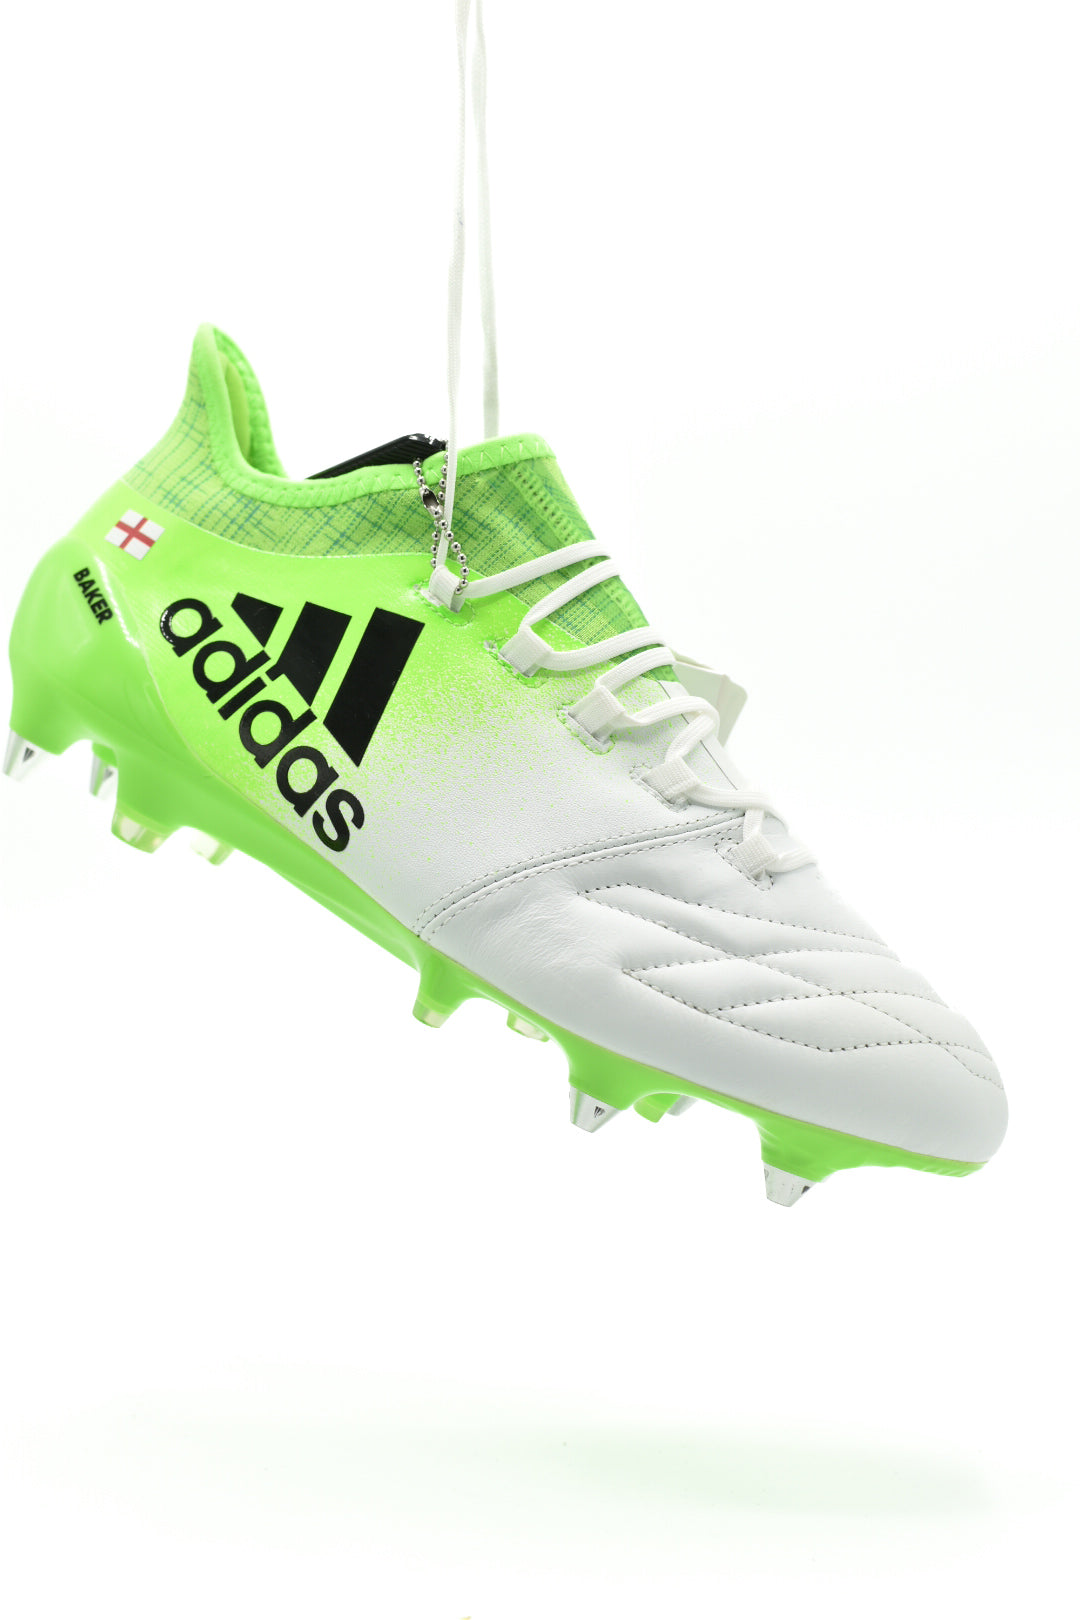 Exagerar lb estas ADIDAS X 16.1 LEATHER SG 'PLAYER ISSUED' – Dutch Boot Collector (DBC)